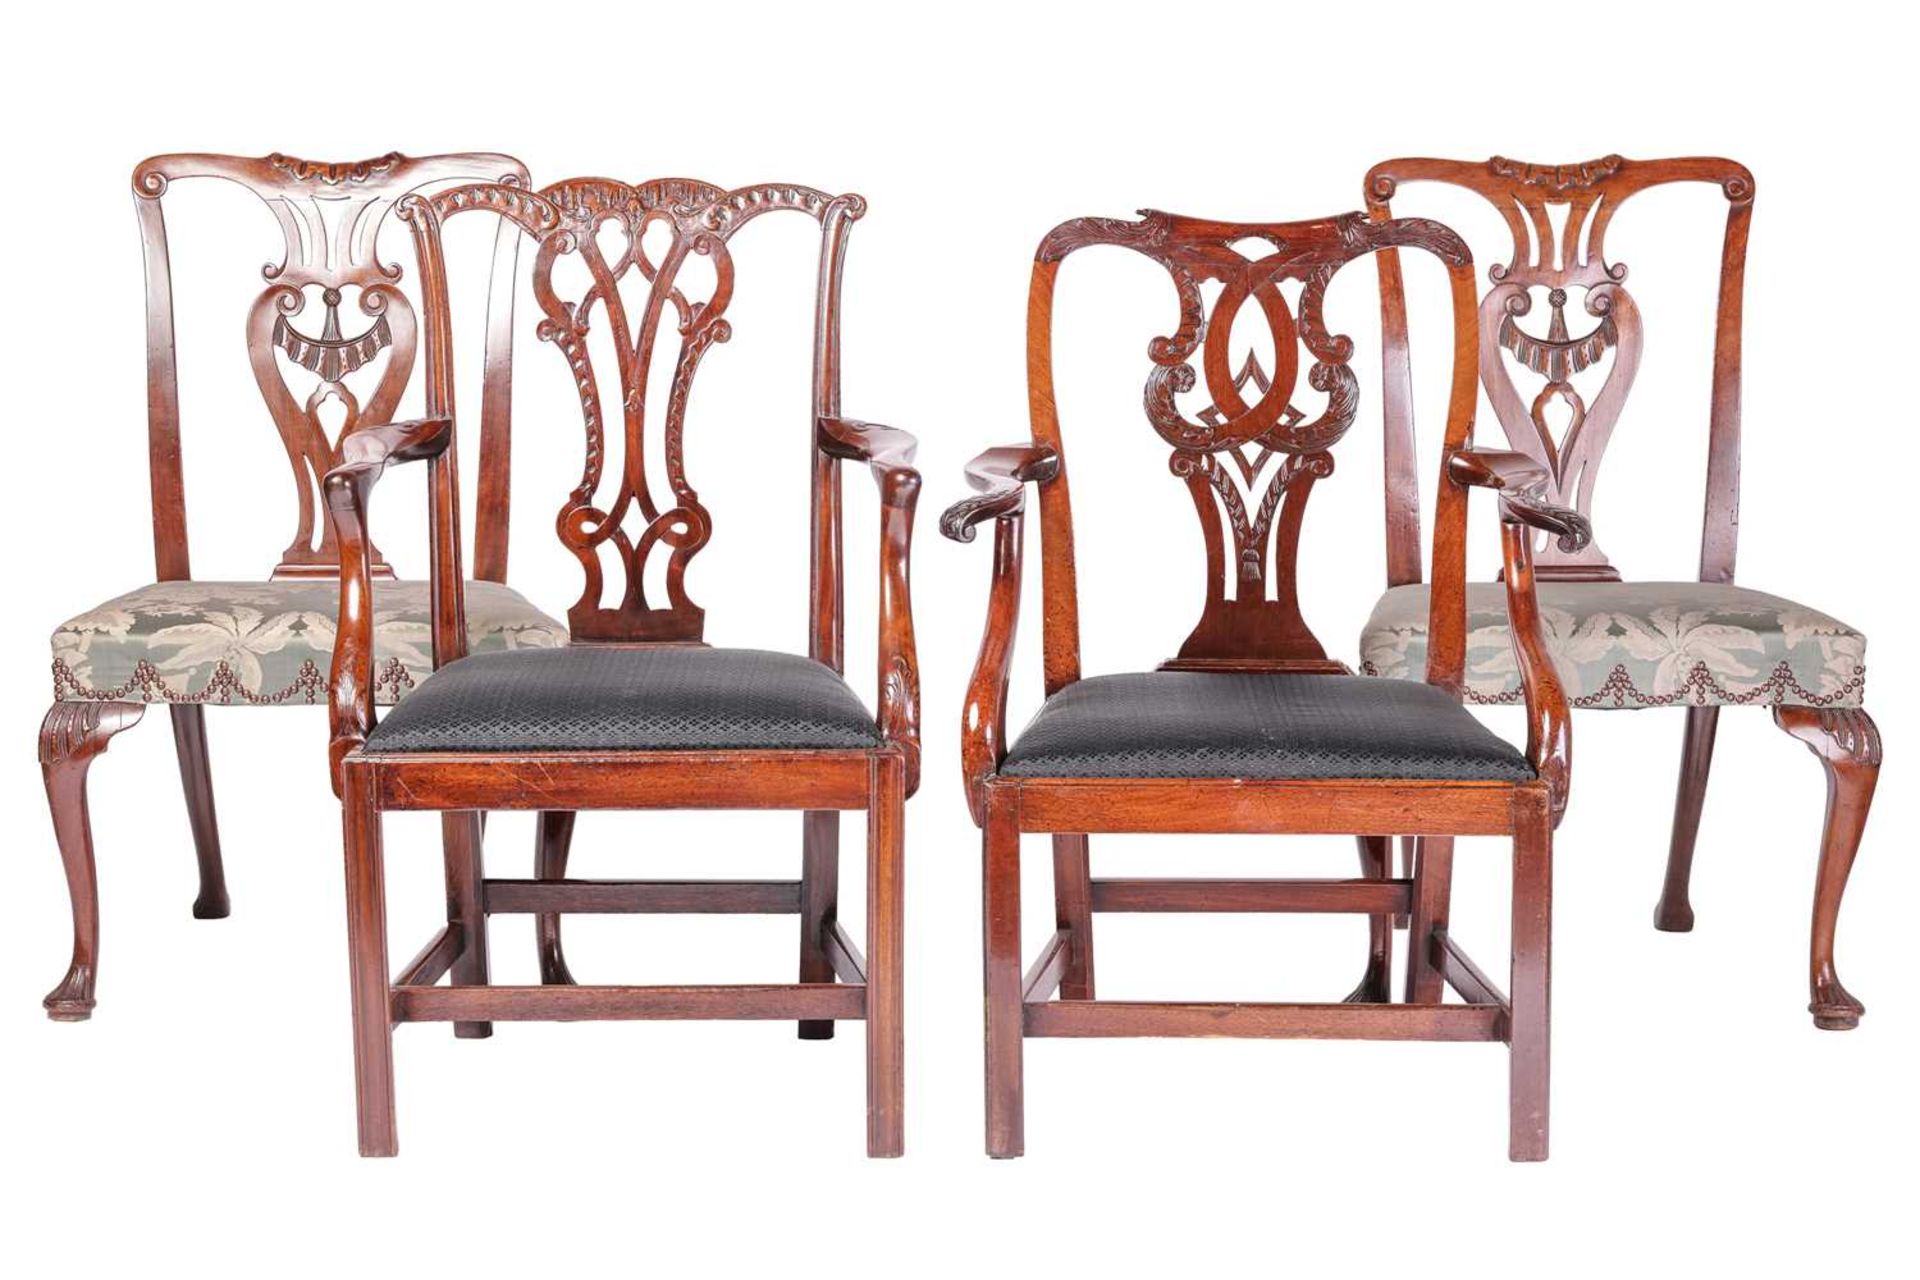 A pair of eighteenth-century Chippendale period mahogany cabriole legged side chairs with concave